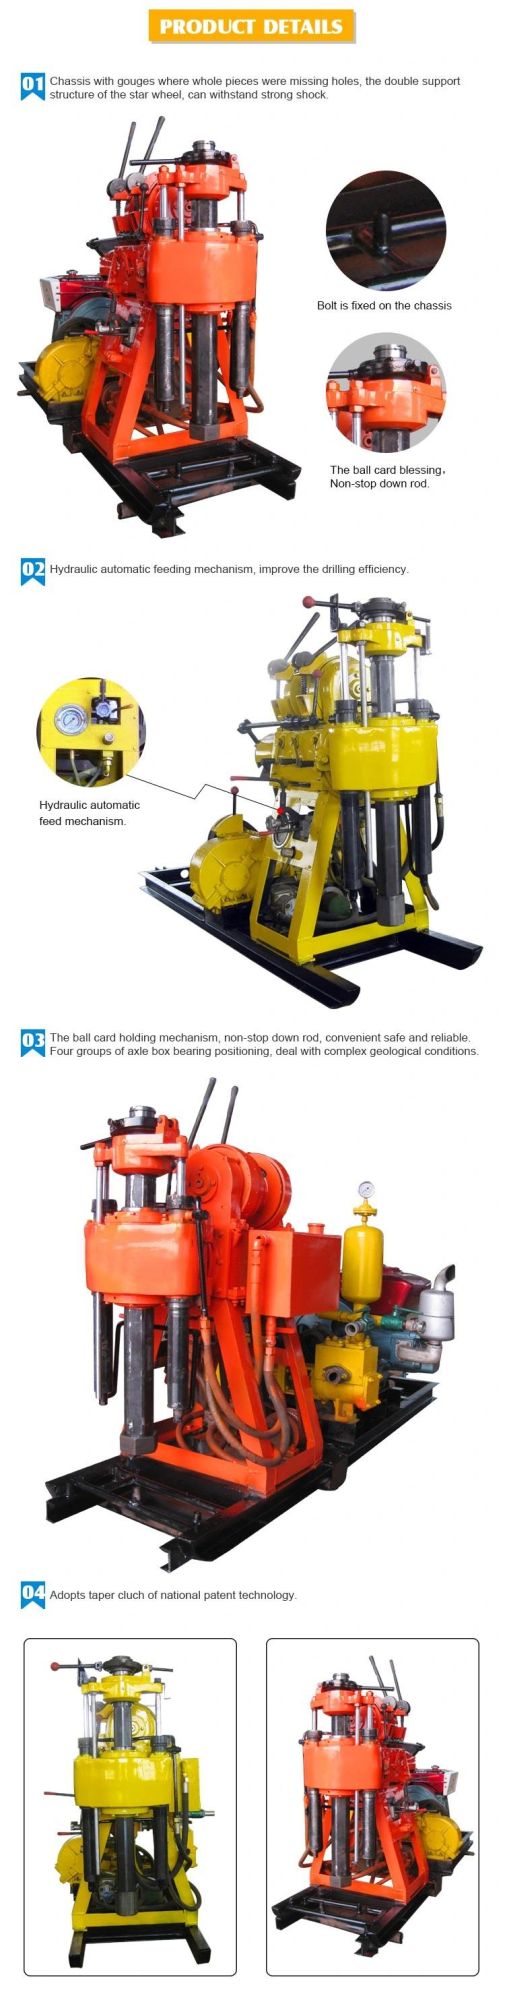 Dminingwell Hz-130yy Portable Core Drill Rigs Surface Core Drilling Machine Bore Hole Drilling Machines Core Drills for Sale